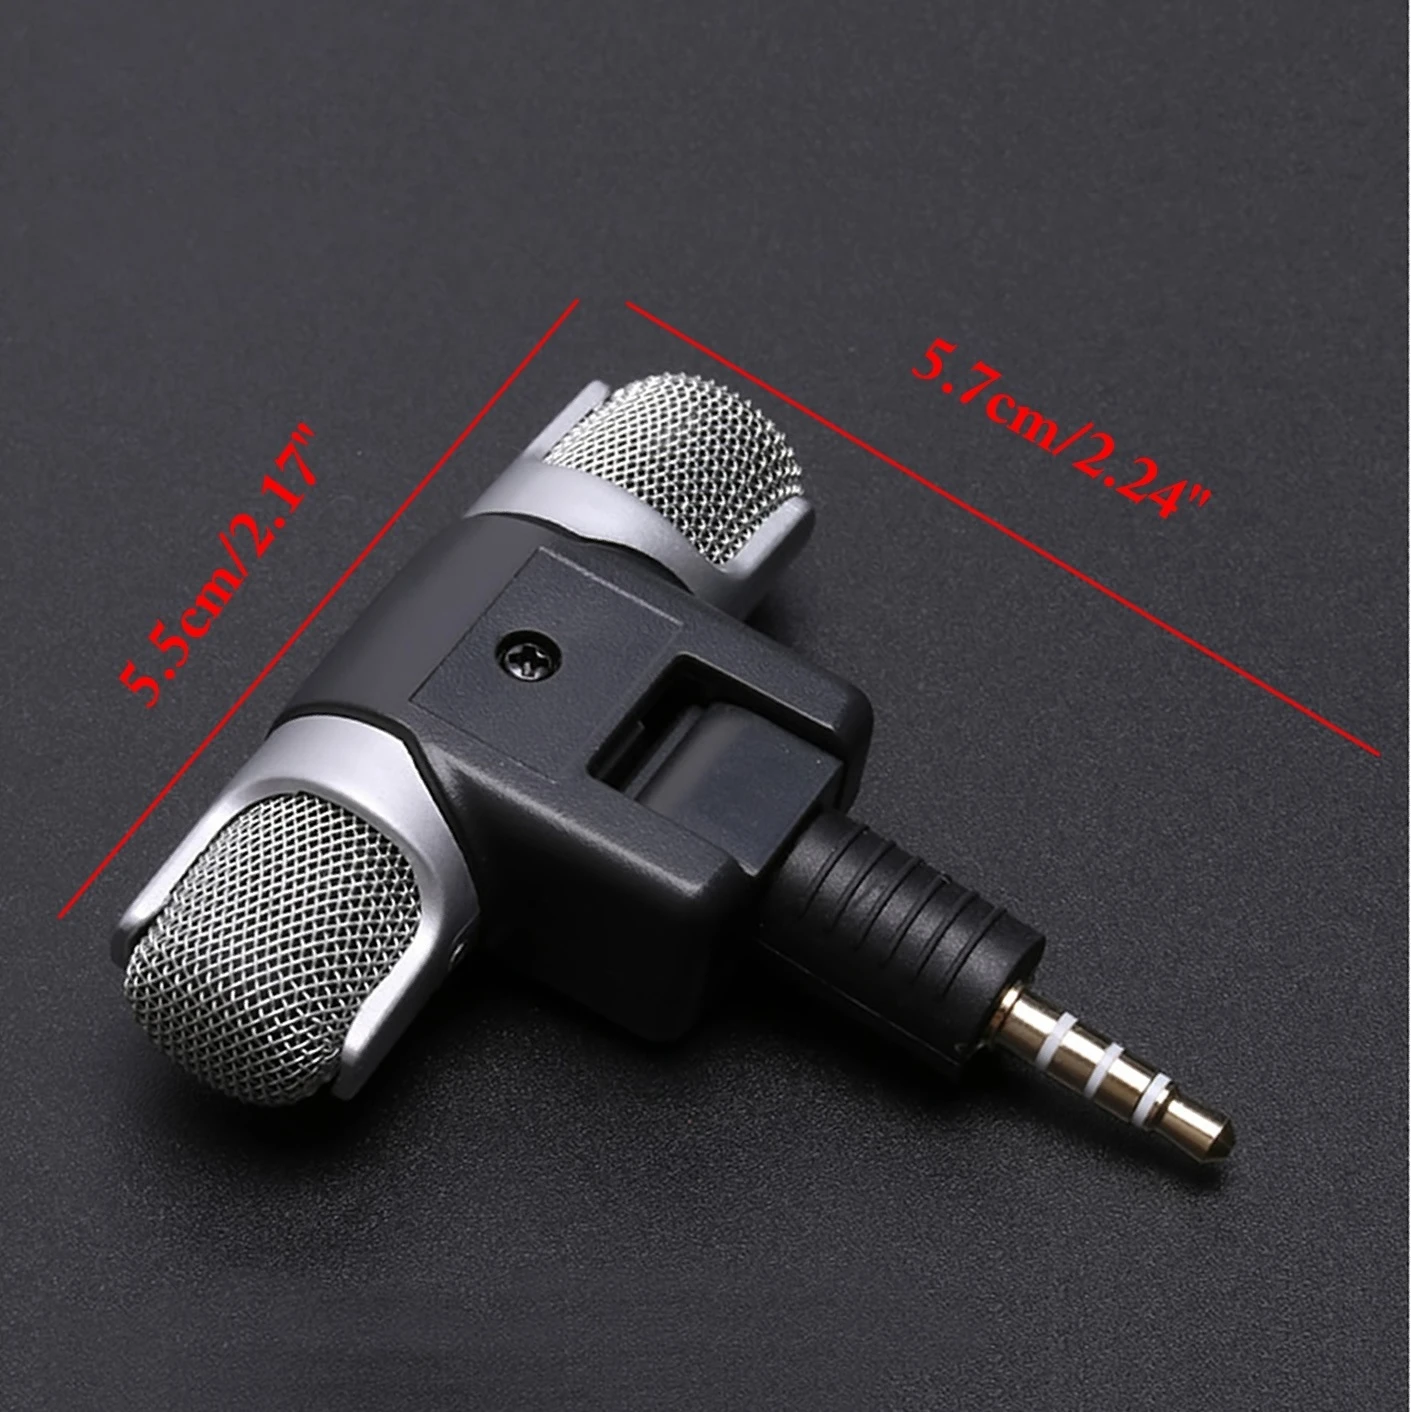 Mini 3.5mm Jack Microphone Stereo Mic For Recording Mobile Phone Studio Interview Microphone For Smartphone